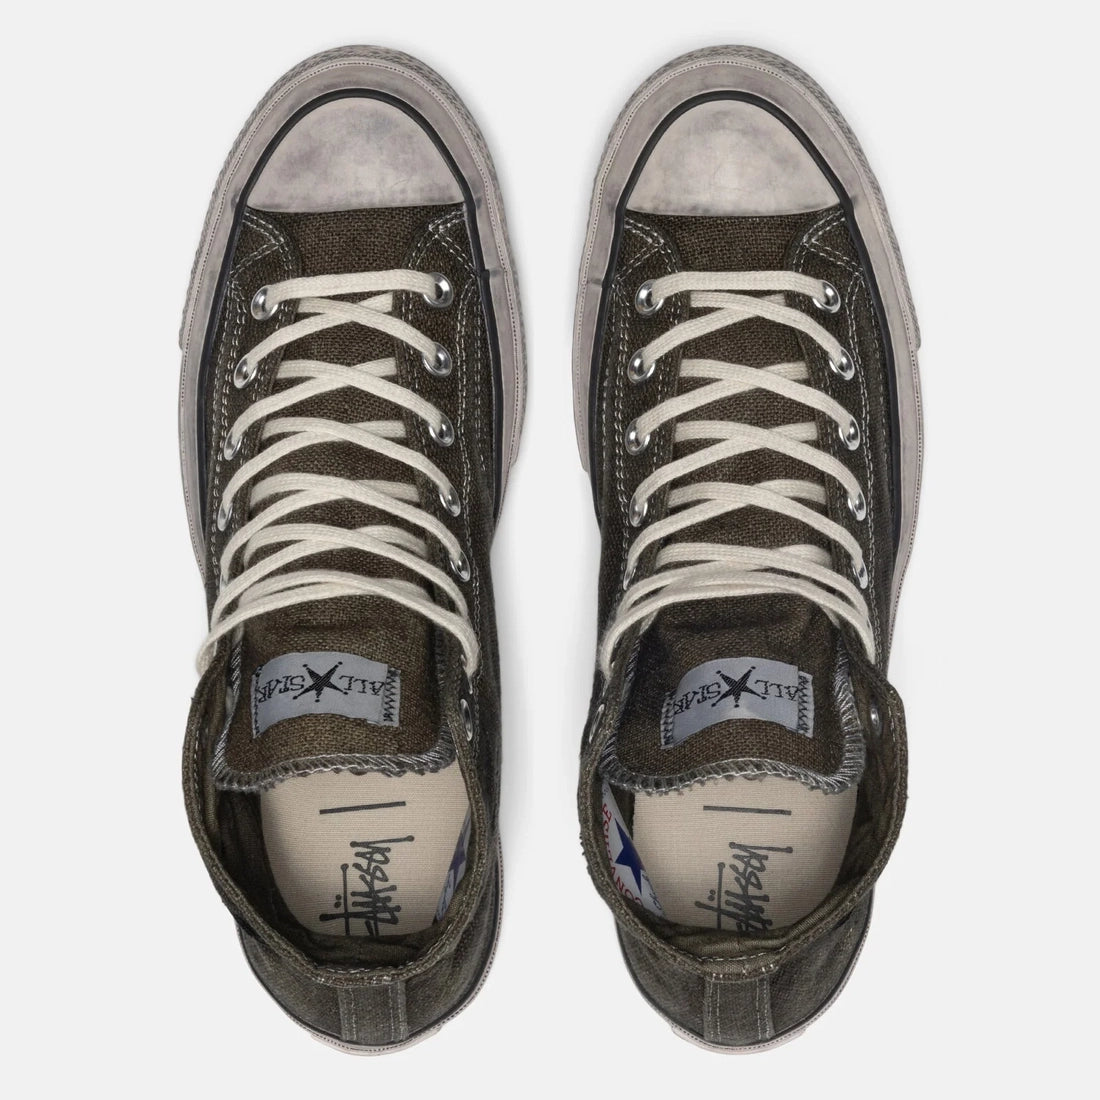 our legacy stussy converse chuck 70's hi